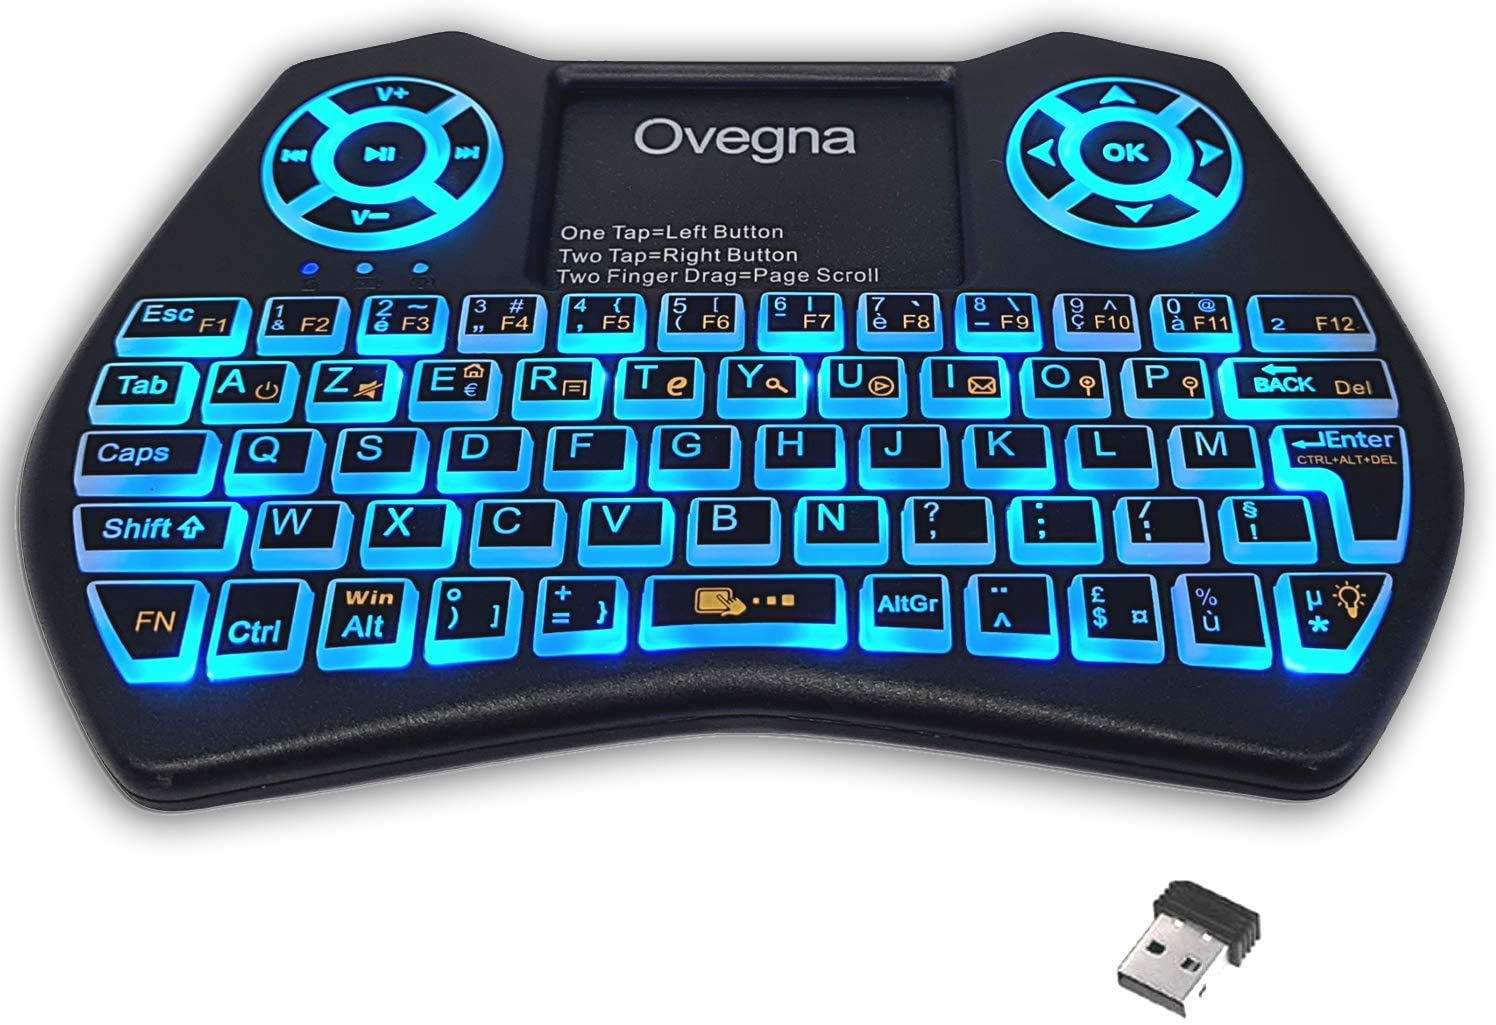 Ovegna i9: Wireless Mini Keyboard (AZERTY) 2.4GHz Wireless Touchpad Battery RGB Backlight for Smart TV, PC, Mini PC, Mac, Raspberry PI 2/3/4, Consoles, Laptop and Android Box